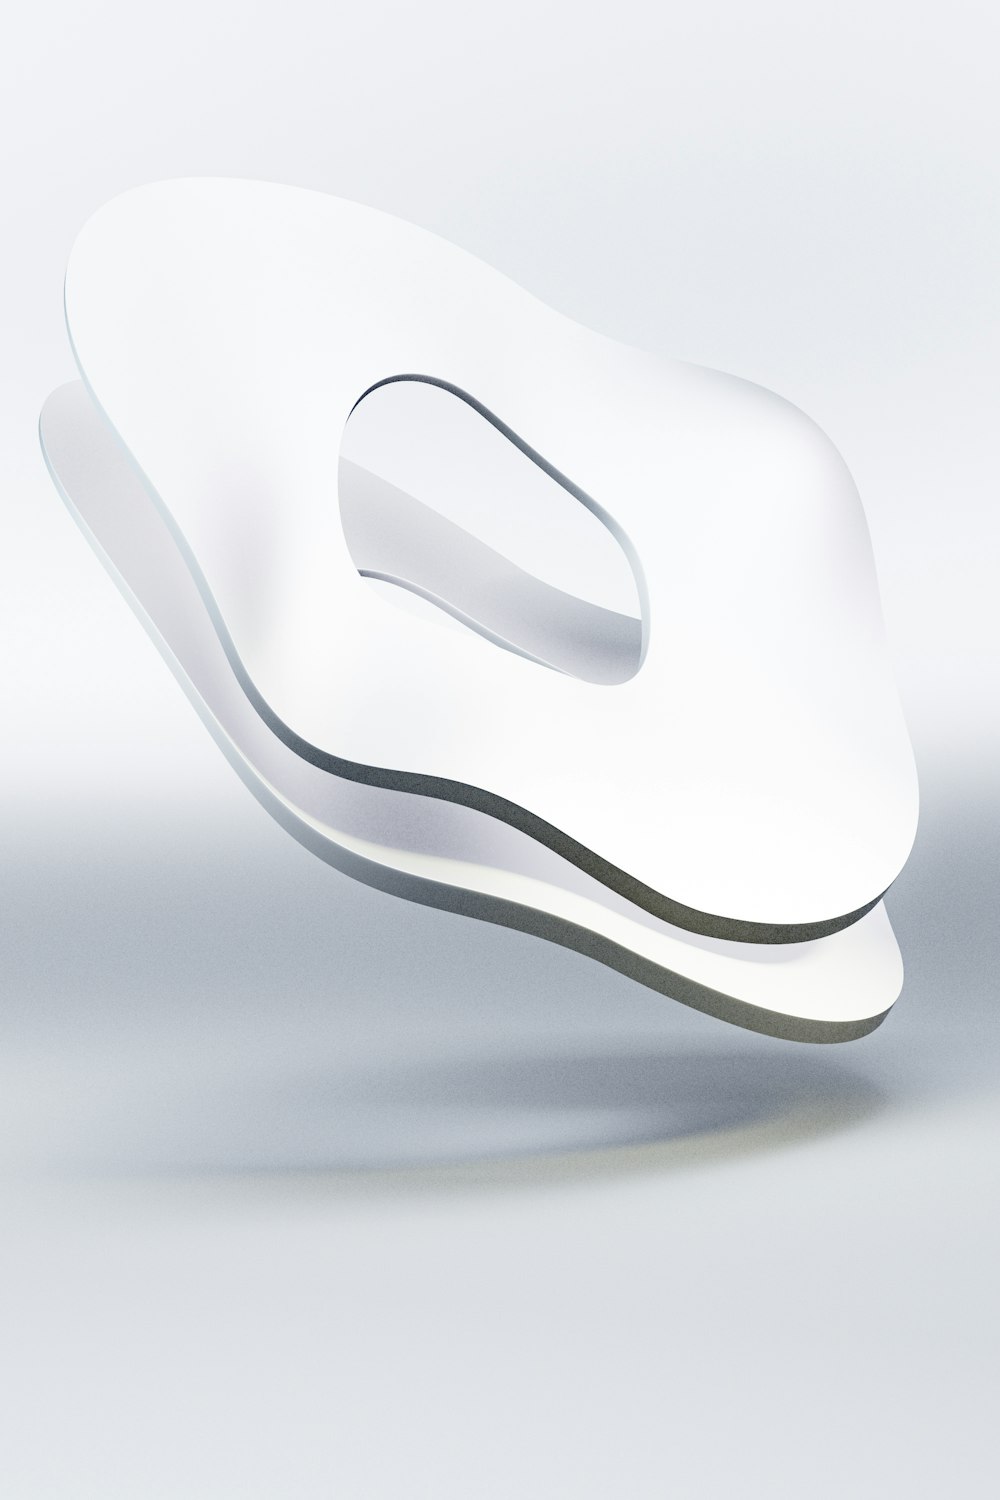 white and black apple magic mouse